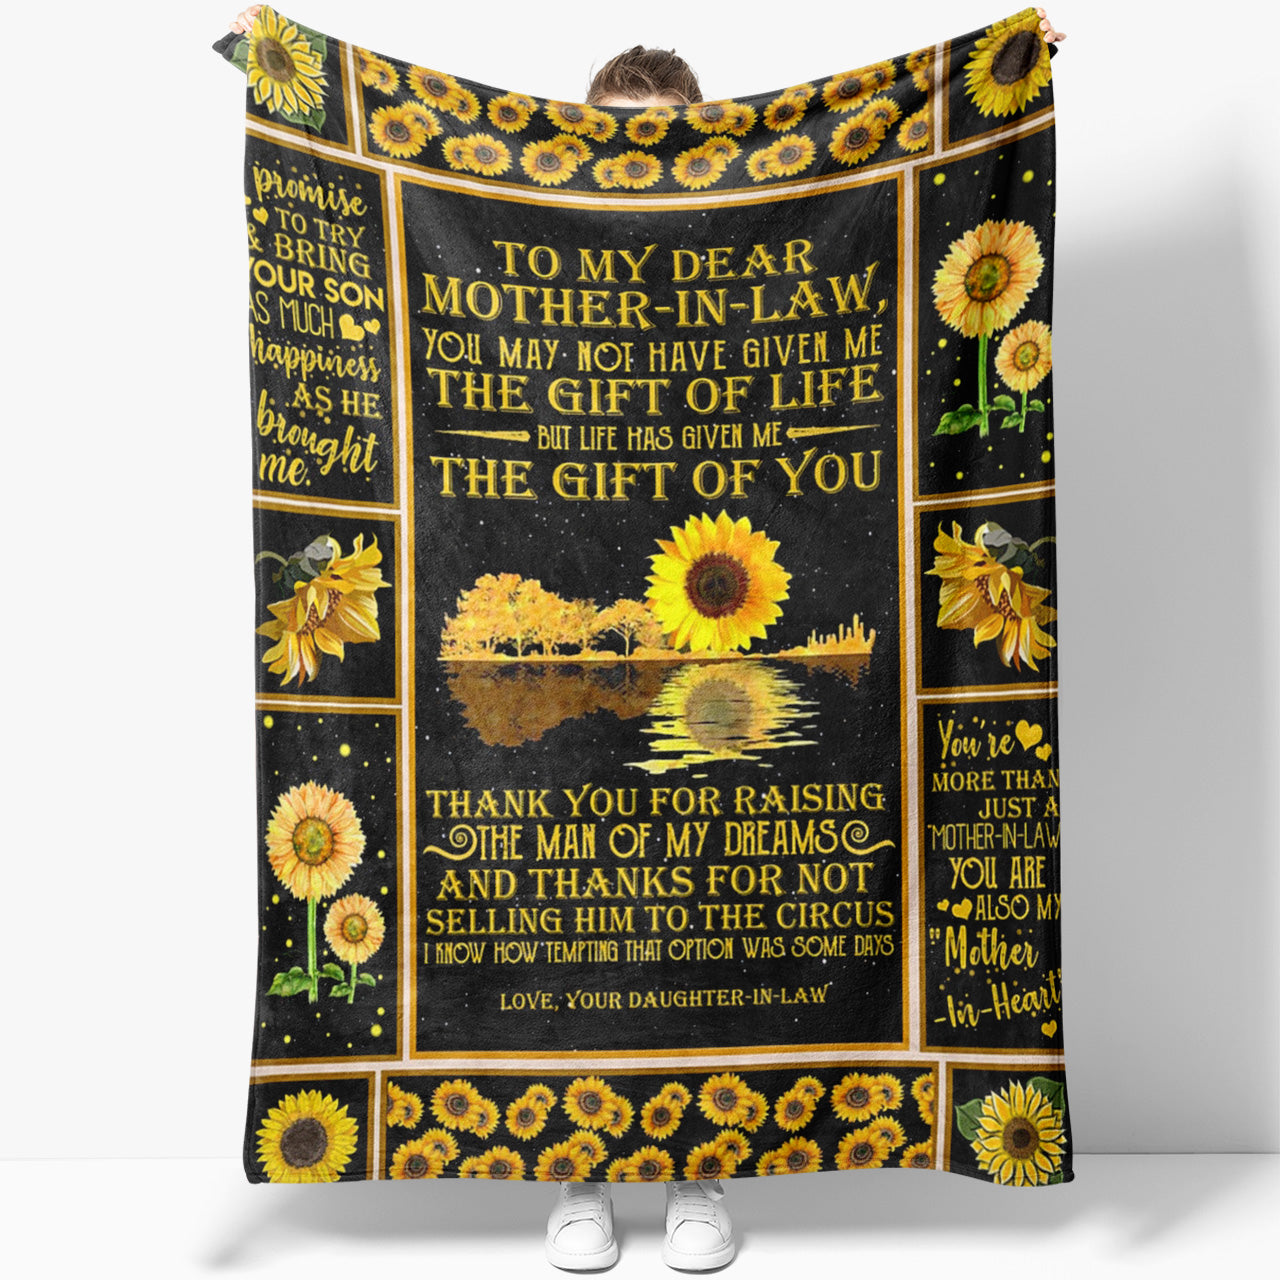 Sunflower Blanket Gift Ideas For Mother in Law, Life Has Given Me The Gift of You, My Mother in Heart Blanket